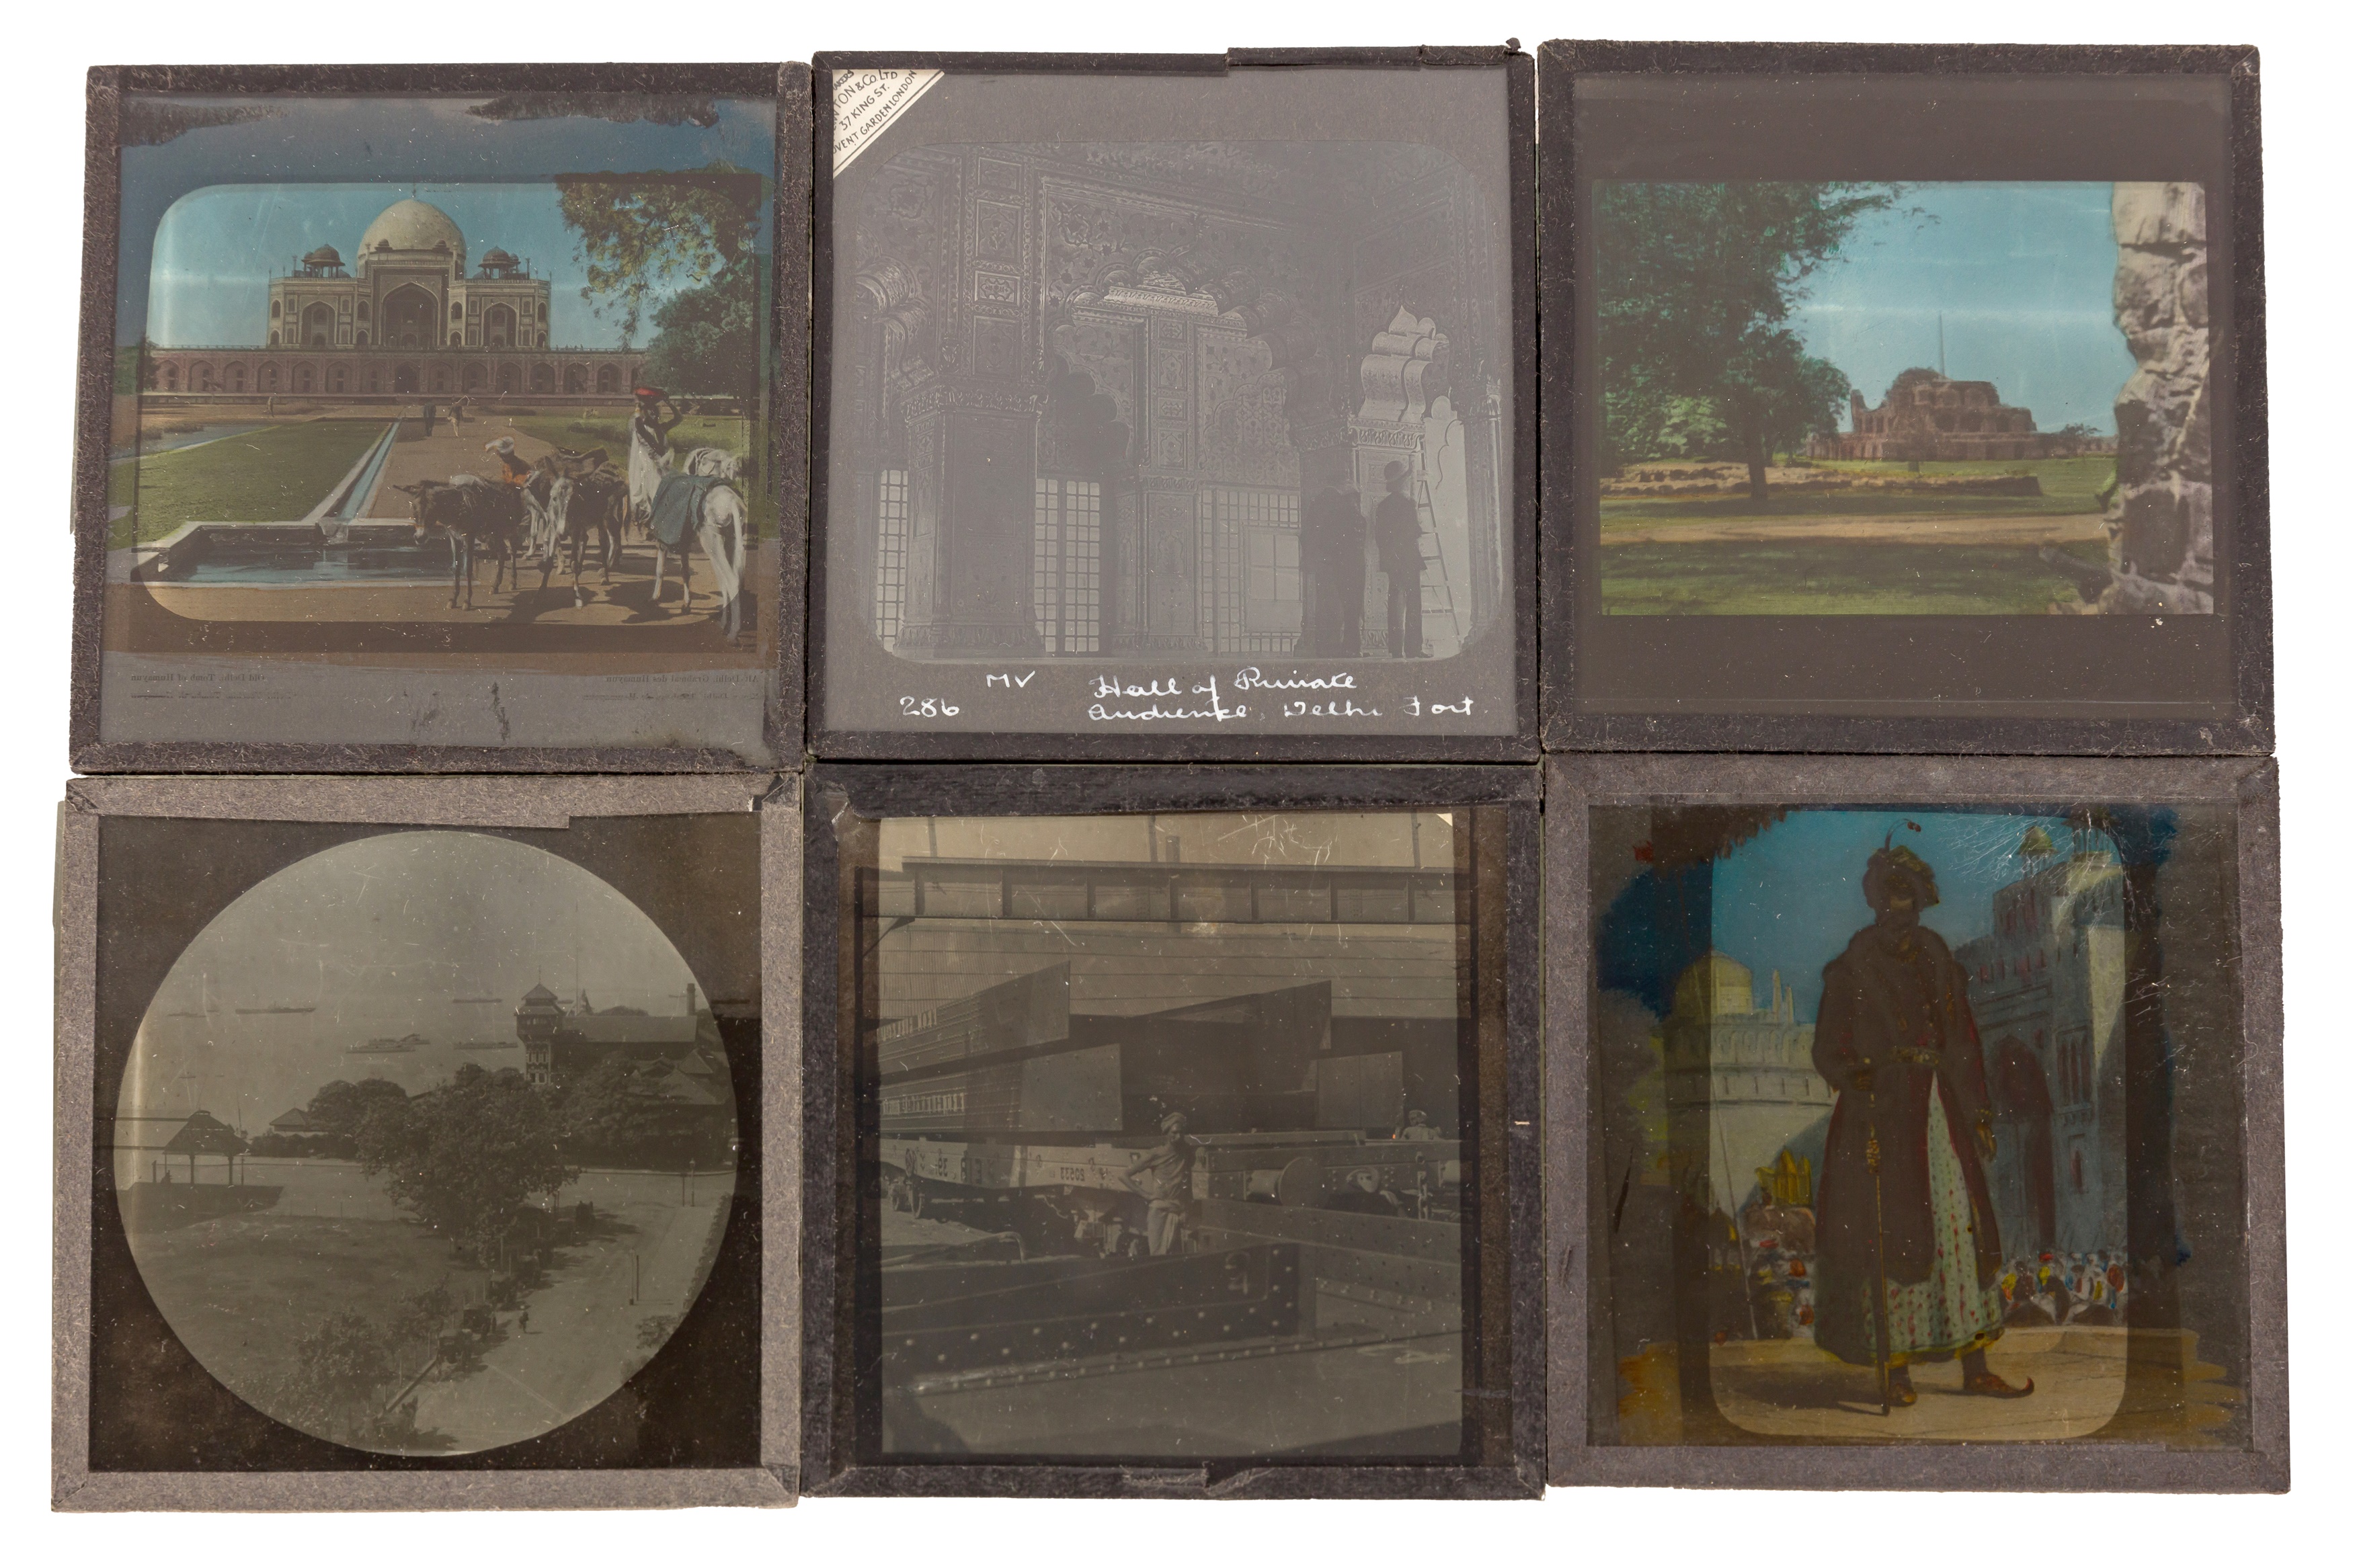 LARGE COLLECTION OF MAGIC LANTERN SLIDES, INDIA, early 20th century